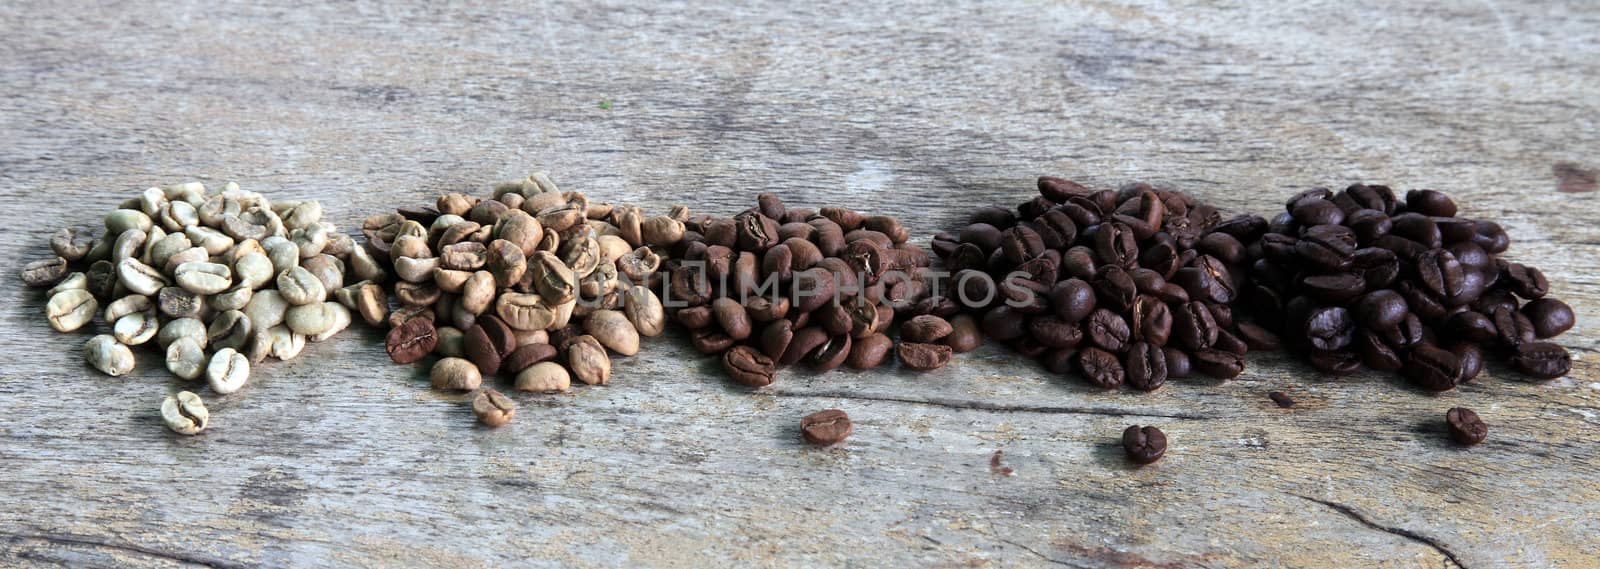 Several piles of coffee beans.